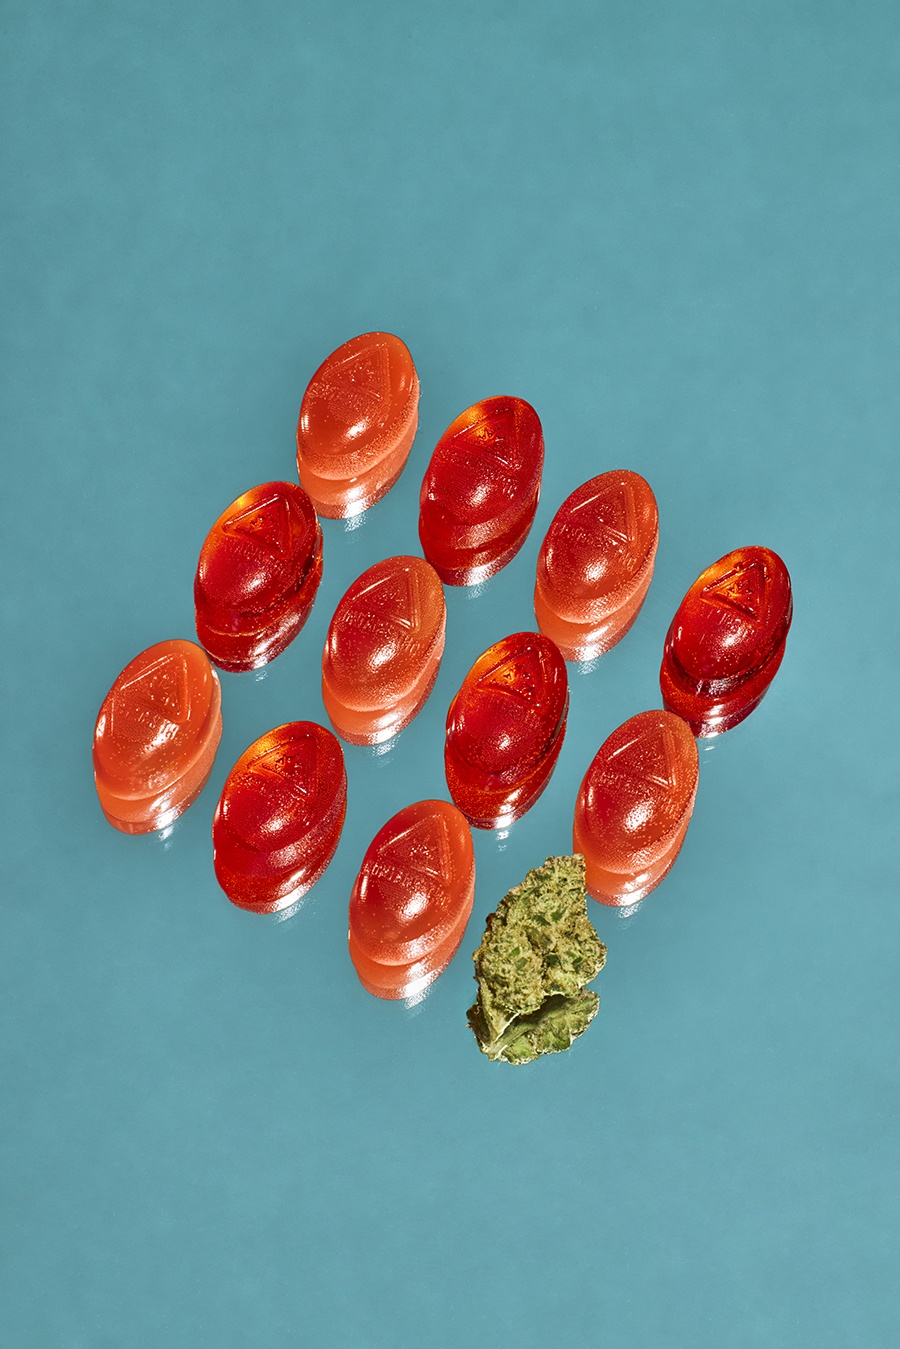 Red and orange infused gummies are displayed on a mirror next to a bit of cannabis.